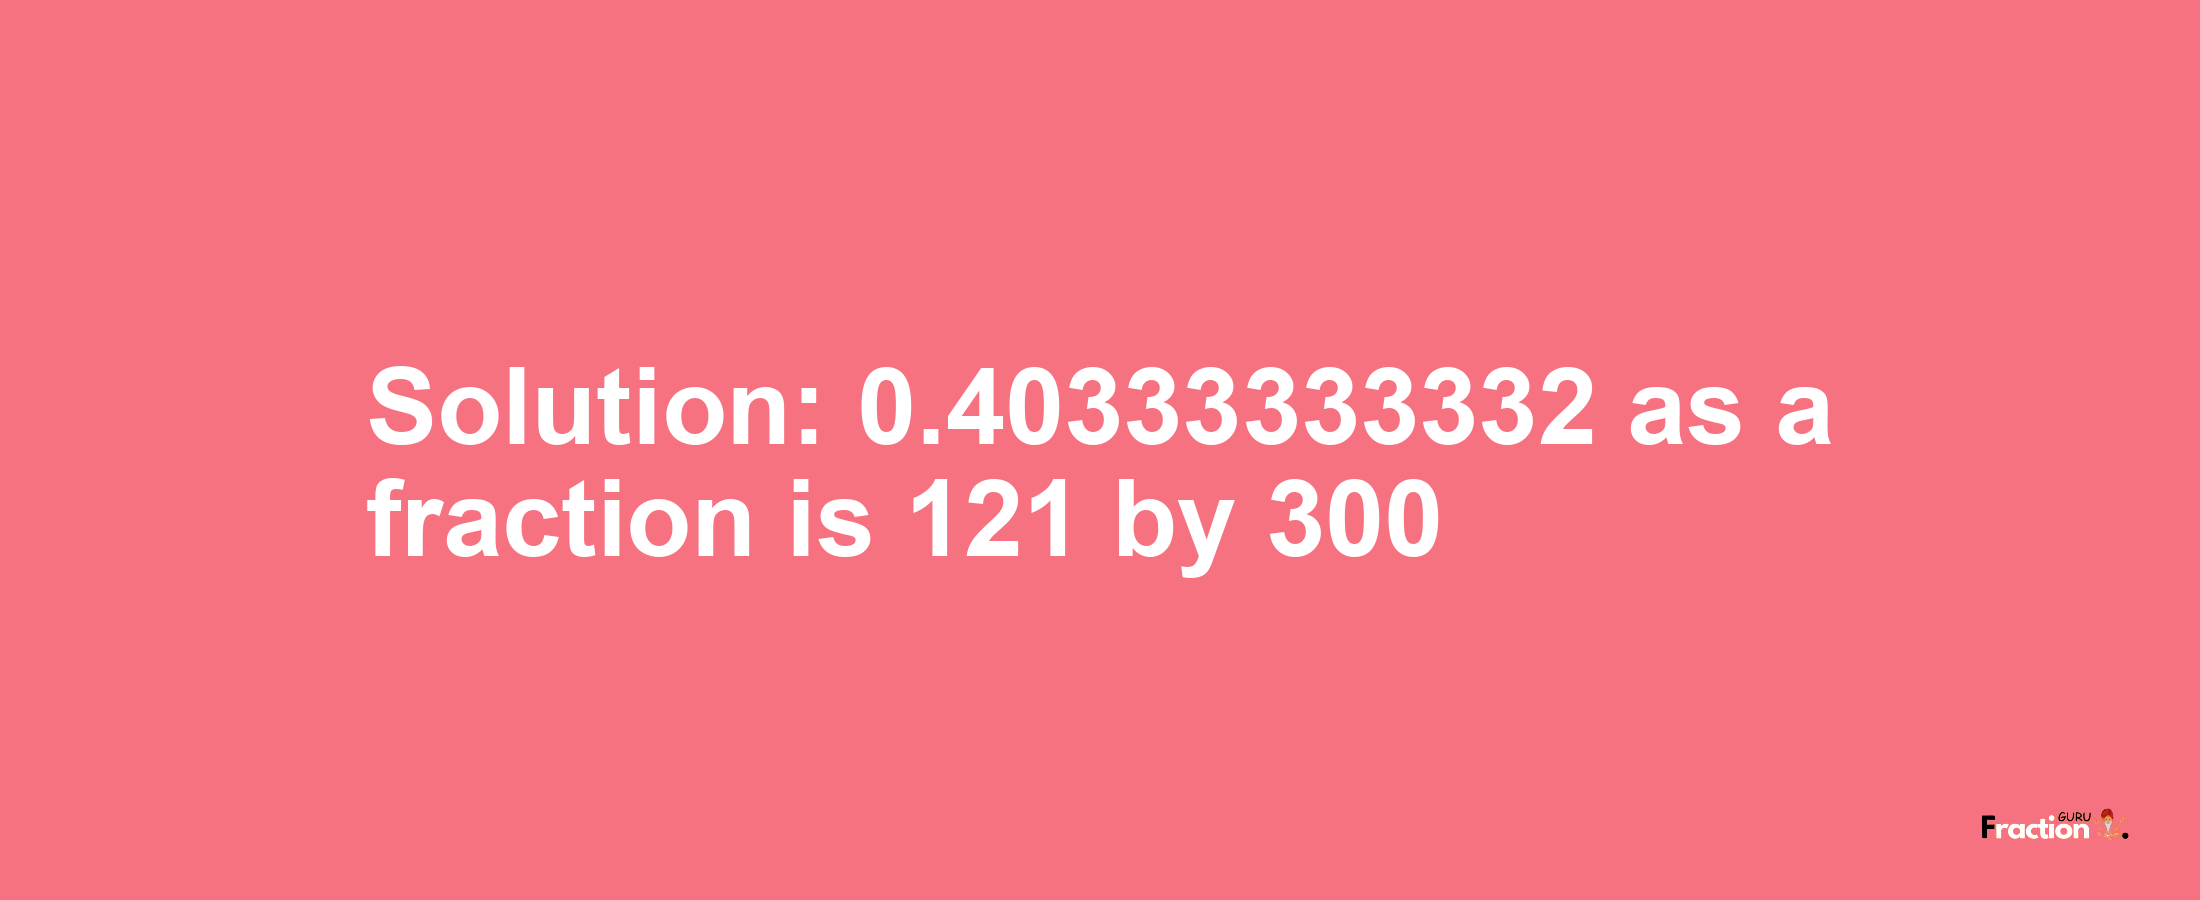 Solution:0.40333333332 as a fraction is 121/300